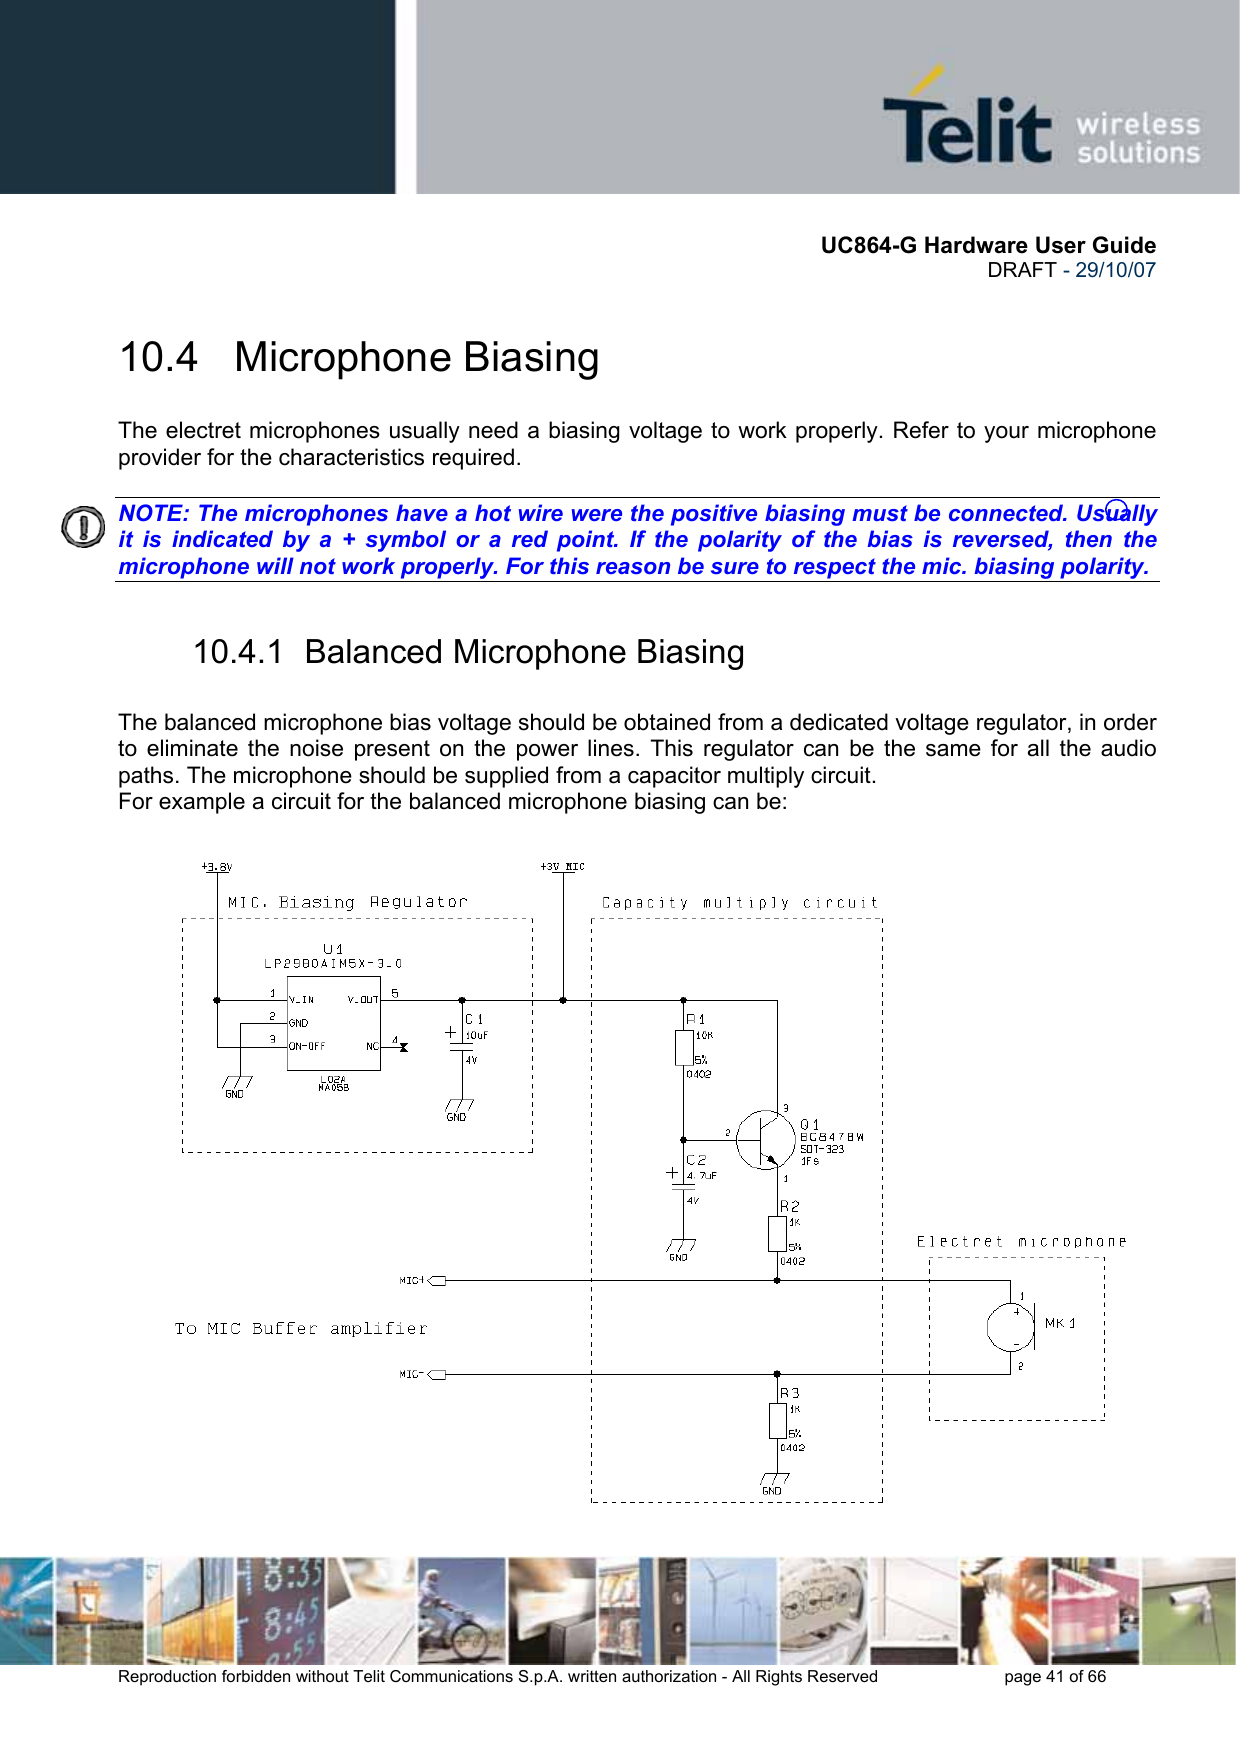       UC864-G Hardware User Guide  DRAFT - 29/10/07      Reproduction forbidden without Telit Communications S.p.A. written authorization - All Rights Reserved    page 41 of 66  10.4   Microphone Biasing The electret microphones usually need a biasing voltage to work properly. Refer to your microphone provider for the characteristics required.  NOTE: The microphones have a hot wire were the positive biasing must be connected. Usually it is indicated by a + symbol or a red point. If the polarity of the bias is reversed, then the microphone will not work properly. For this reason be sure to respect the mic. biasing polarity.   10.4.1  Balanced Microphone Biasing  The balanced microphone bias voltage should be obtained from a dedicated voltage regulator, in order to eliminate the noise present on the power lines. This regulator can be the same for all the audio paths. The microphone should be supplied from a capacitor multiply circuit. For example a circuit for the balanced microphone biasing can be:  